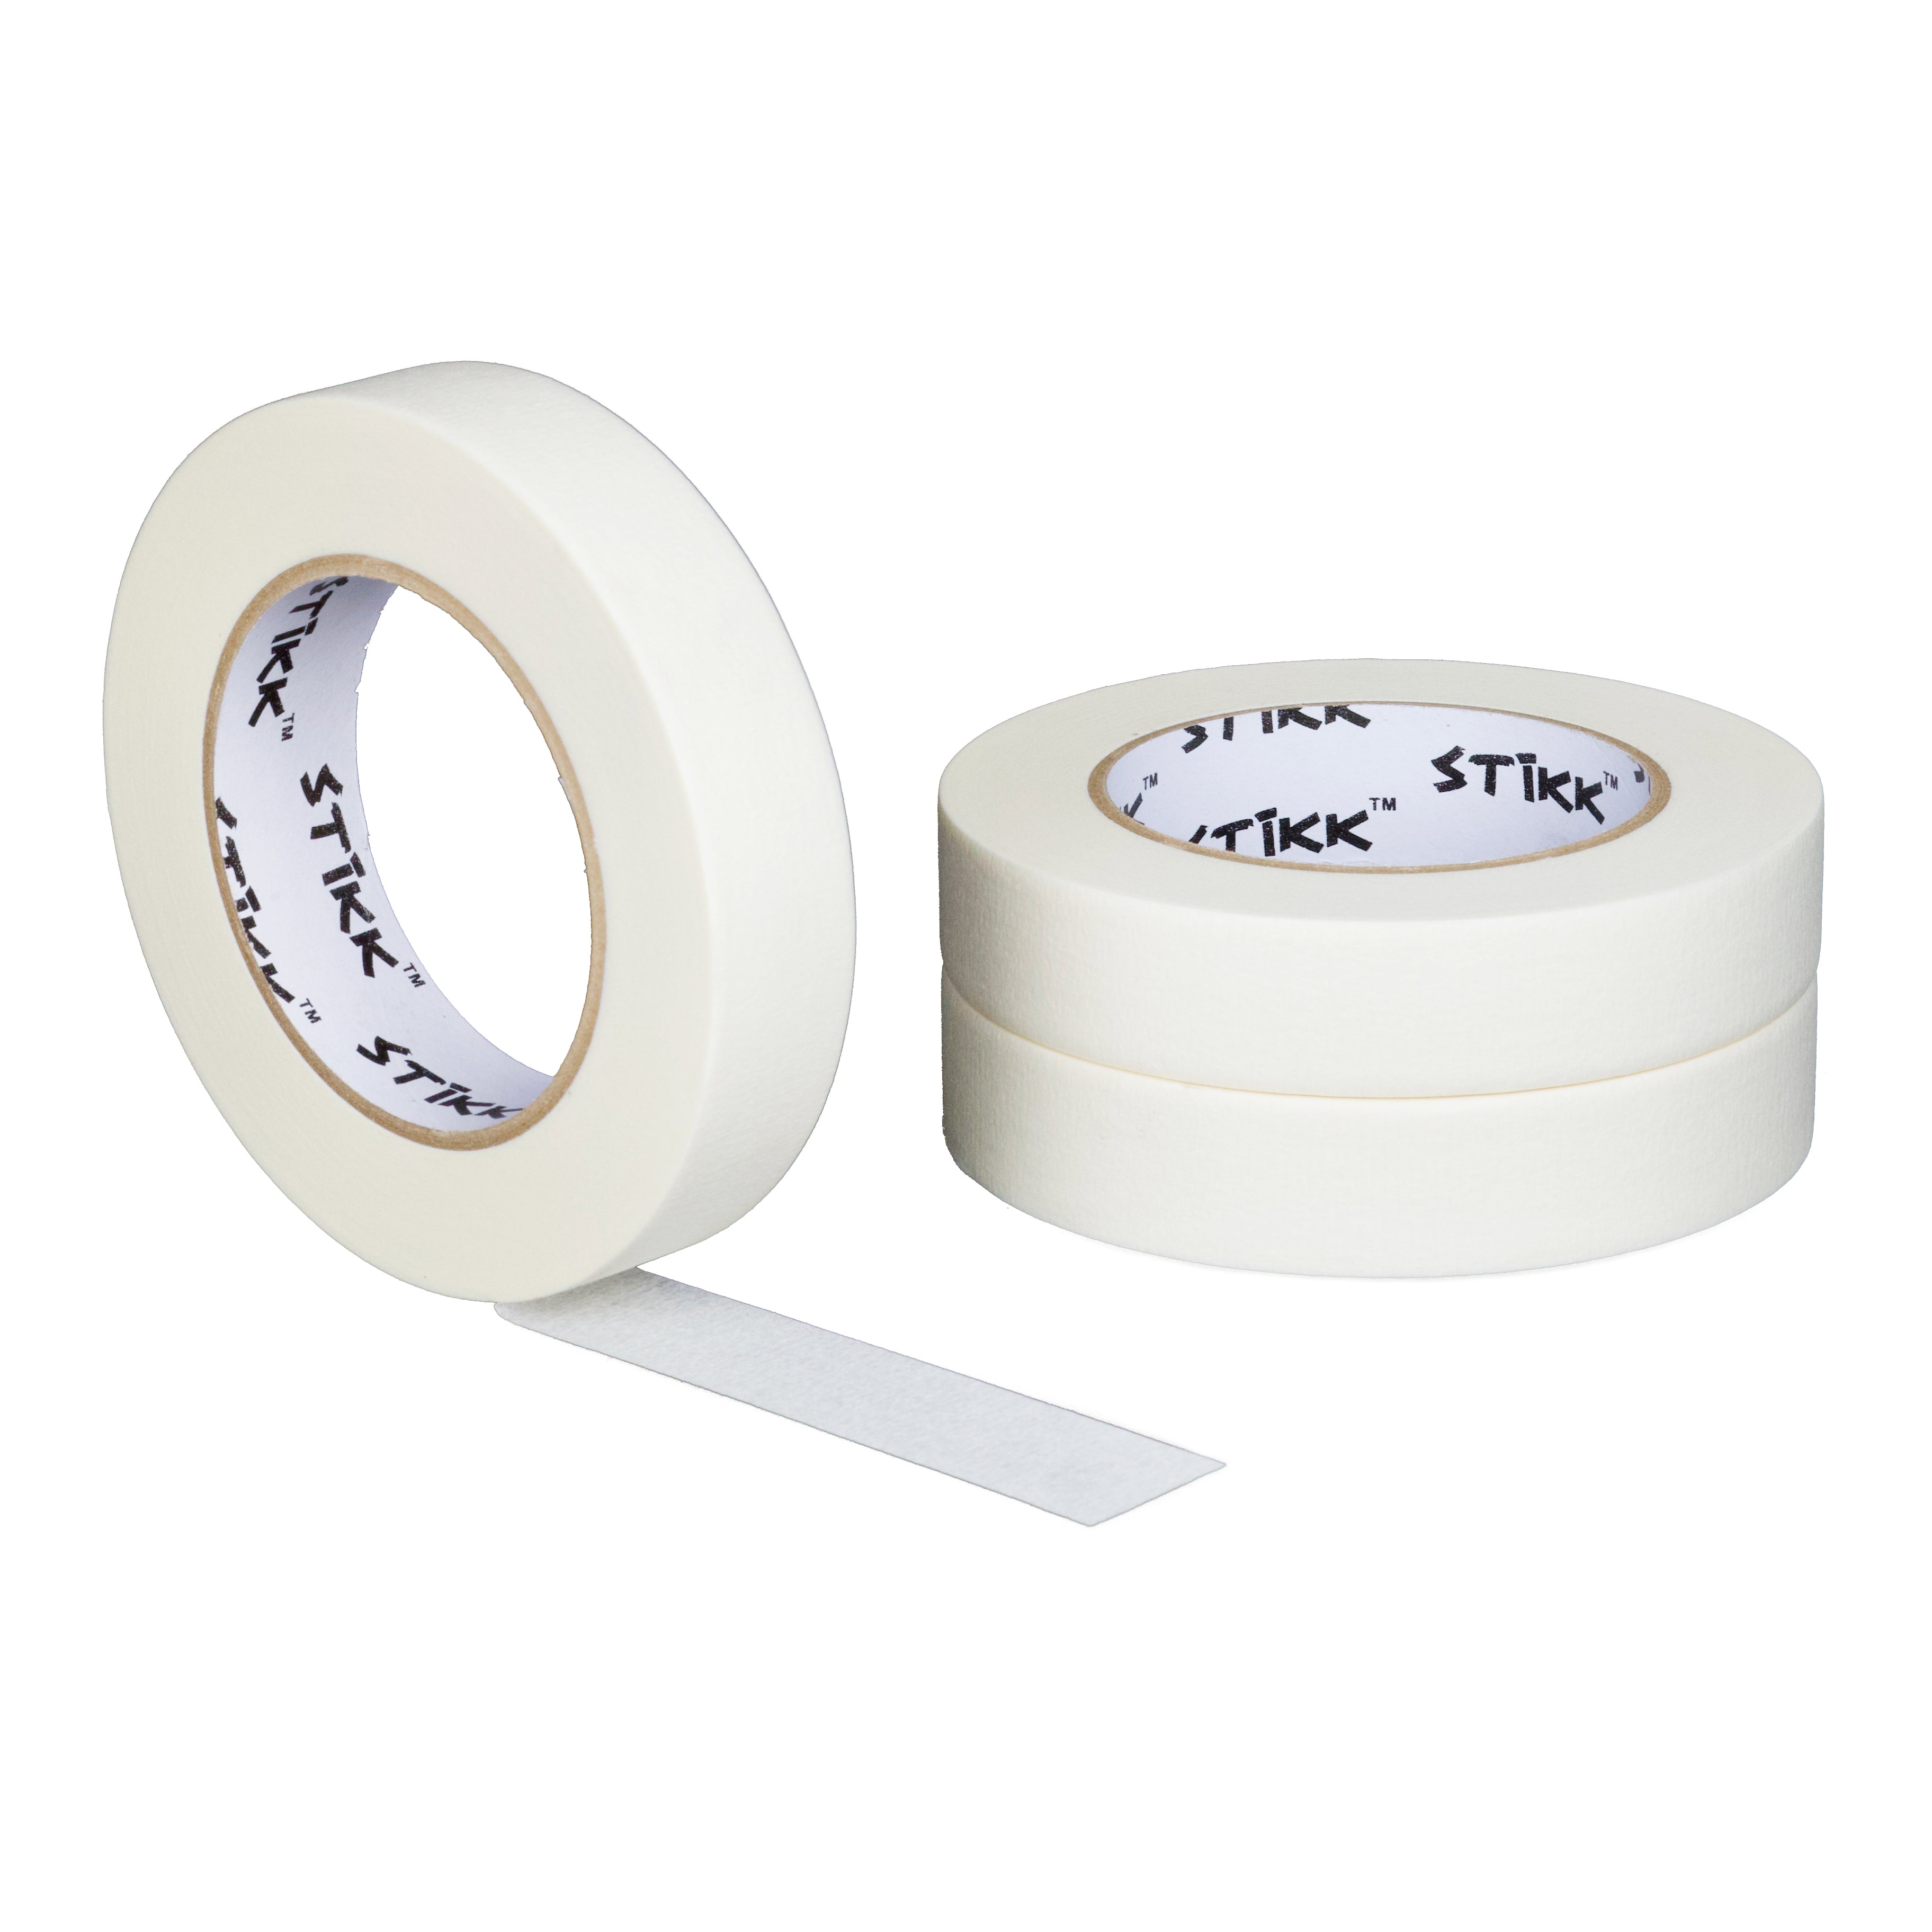 Painters Tape Adhesive Painting Tape 3.15 Inches x 21.87 Yards White 3 Pcs  - 8cm x 20m